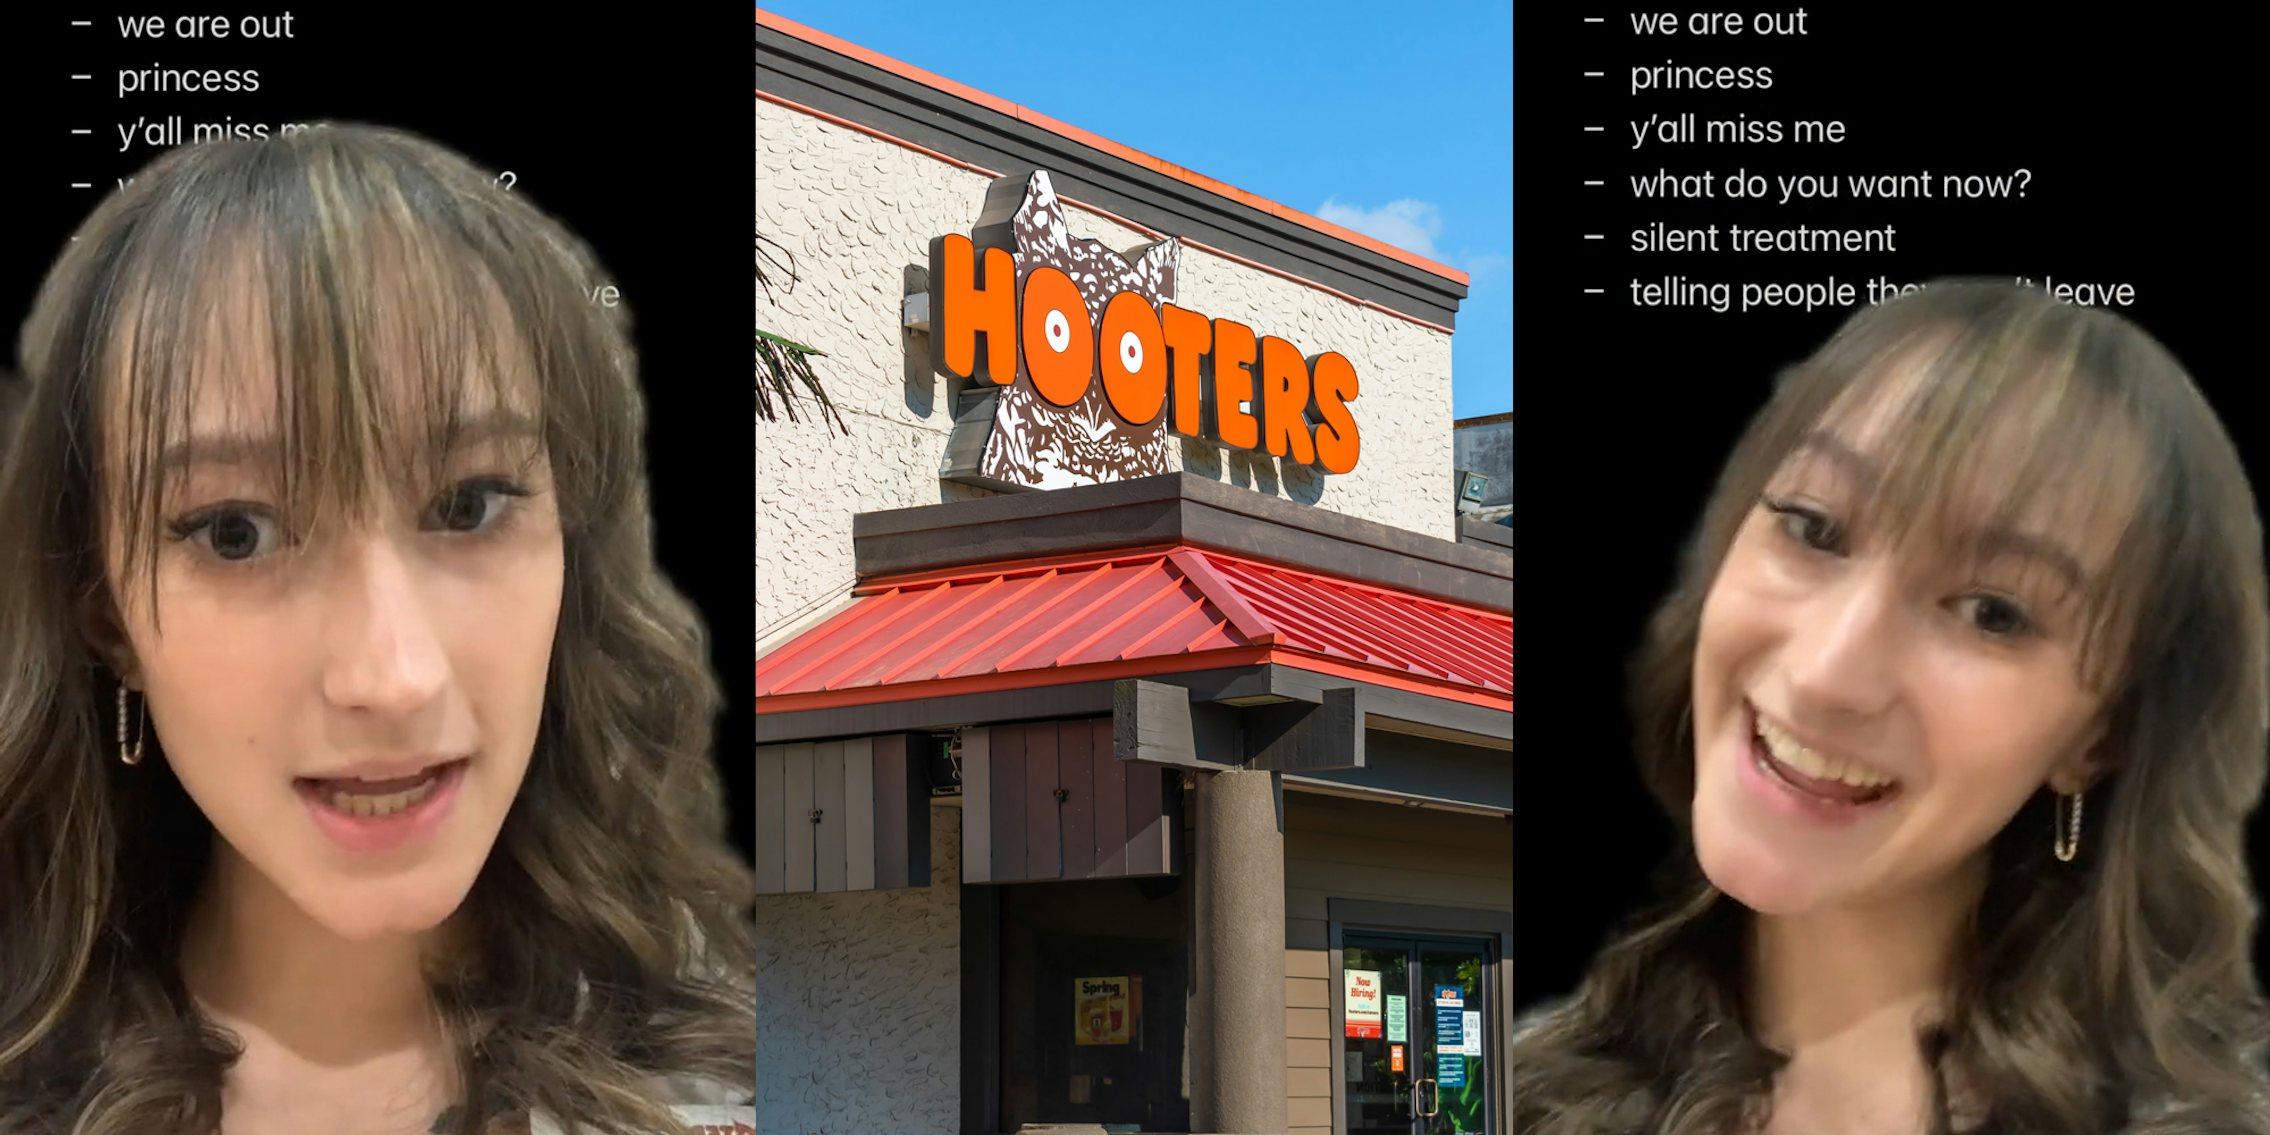 Hooter's employee greenscreen TikTok over list of bits '- we are out - princess - y'all miss me - what do you want now? - silent treatment - telling people they can't leave' (l) Hooter's building with sign (c) Hooter's employee greenscreen TikTok over list of bits '- we are out - princess - y'all miss me - what do you want now? - silent treatment - telling people they can't leave' (r)